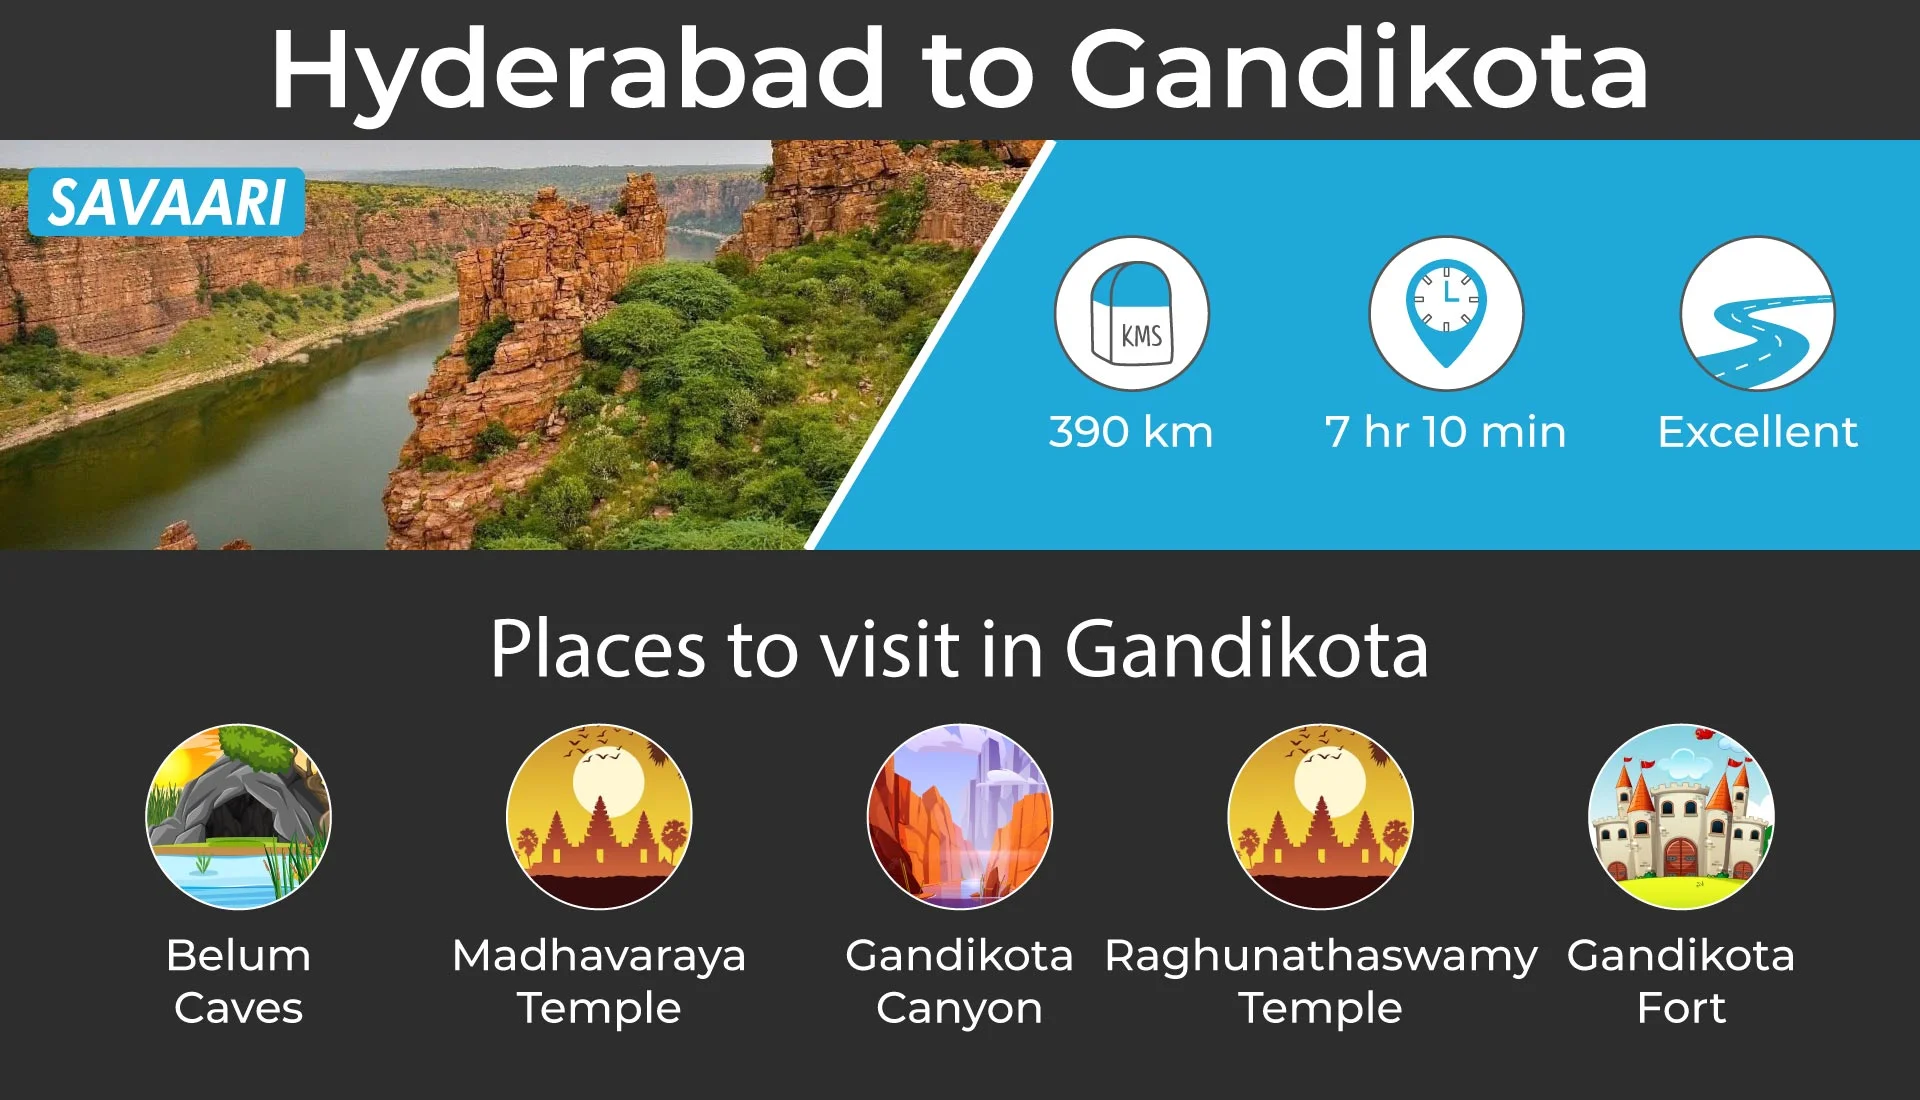 the great canyon of India, place to visit near Hyderabad